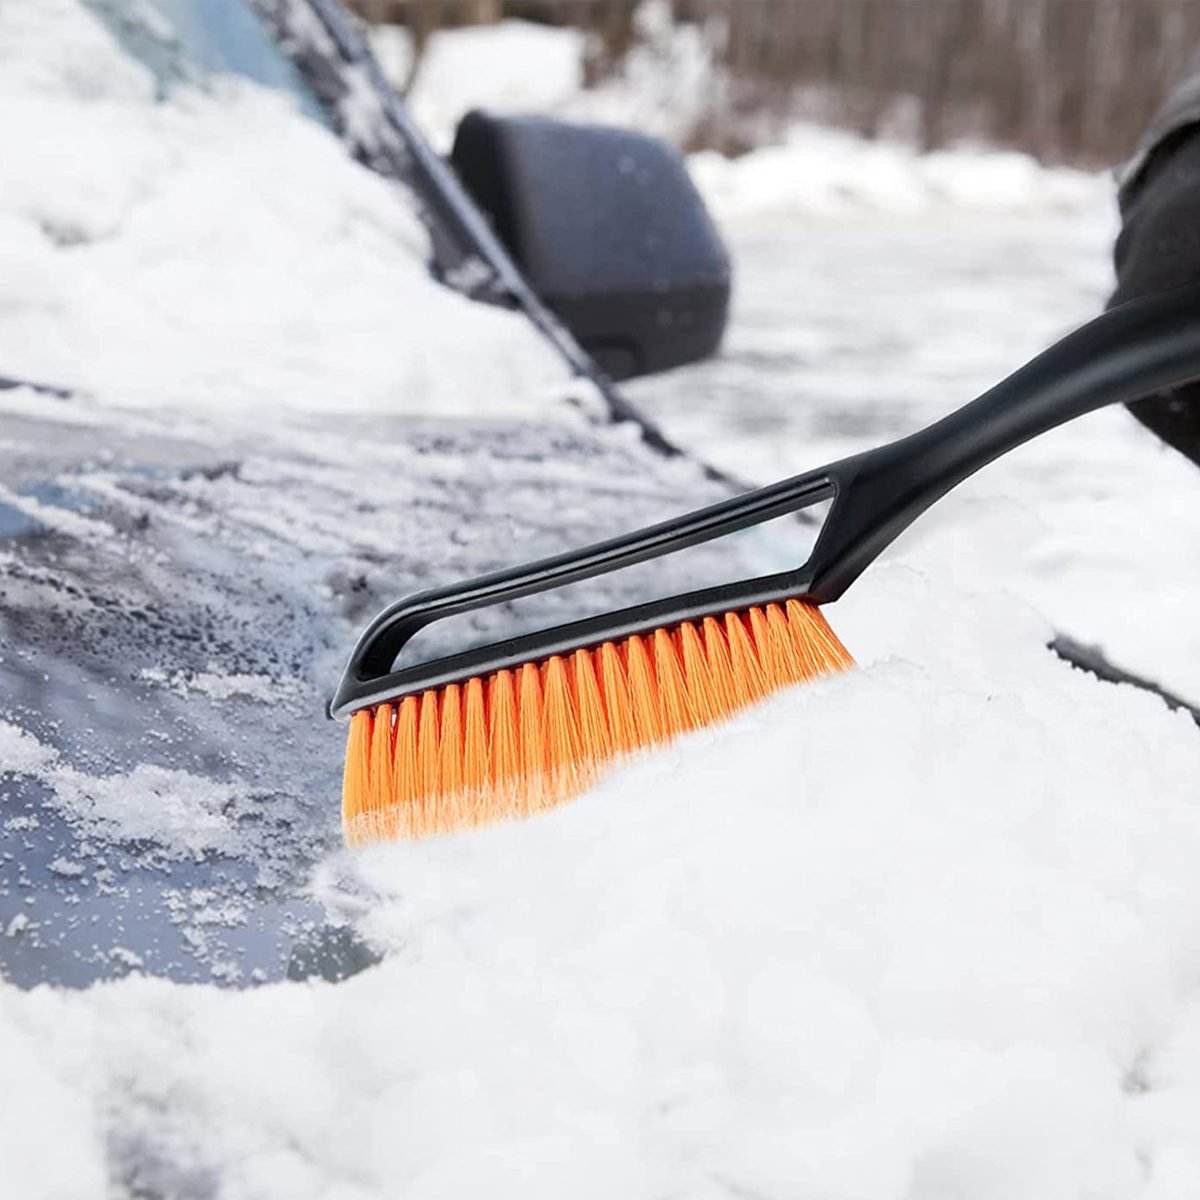 Snow Ice Scraper Snow Brush Shovel Removal Brush Car Vehicle for the Car  Windshield Cleaning Scraping